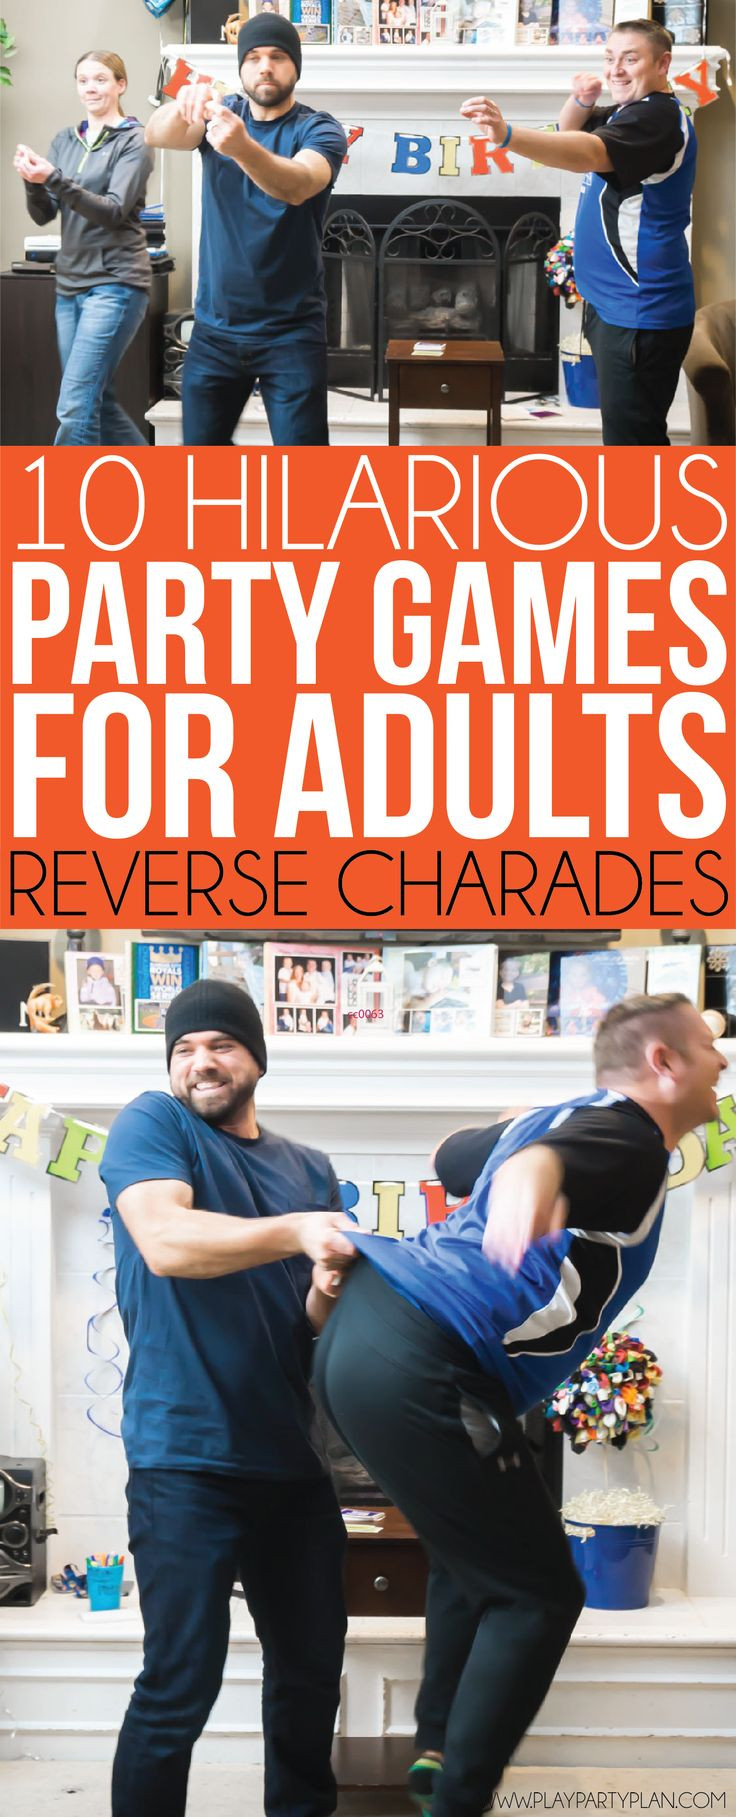 Birthday Activities For Adults
 Hilarious Party Games for Adults